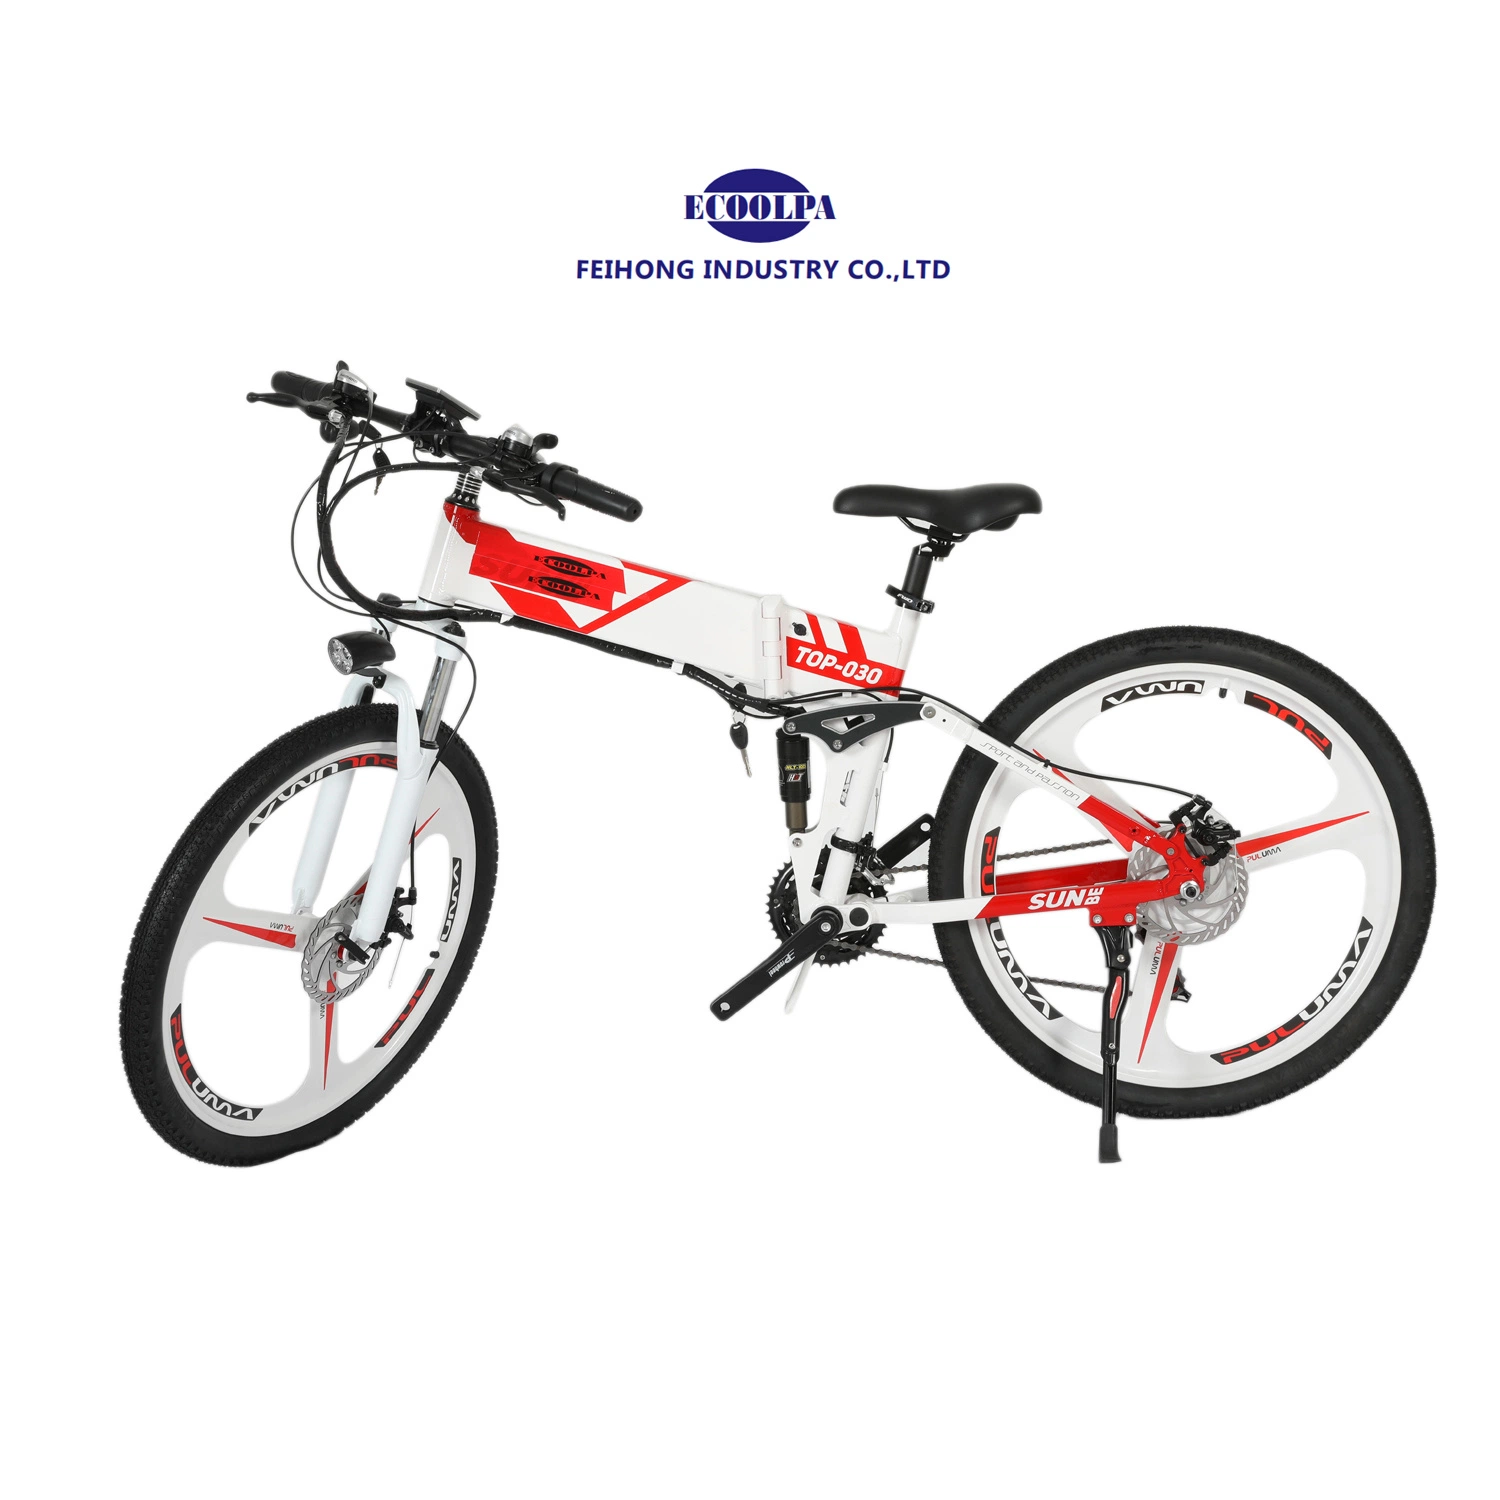 26"Motorcycle Electric Scooter Bicycle Electric Bike Electric Motorcycle Scooter Motor Scooter Battery 48V 7.8ah 500W Motor Electric Cargo Bike Eb-64